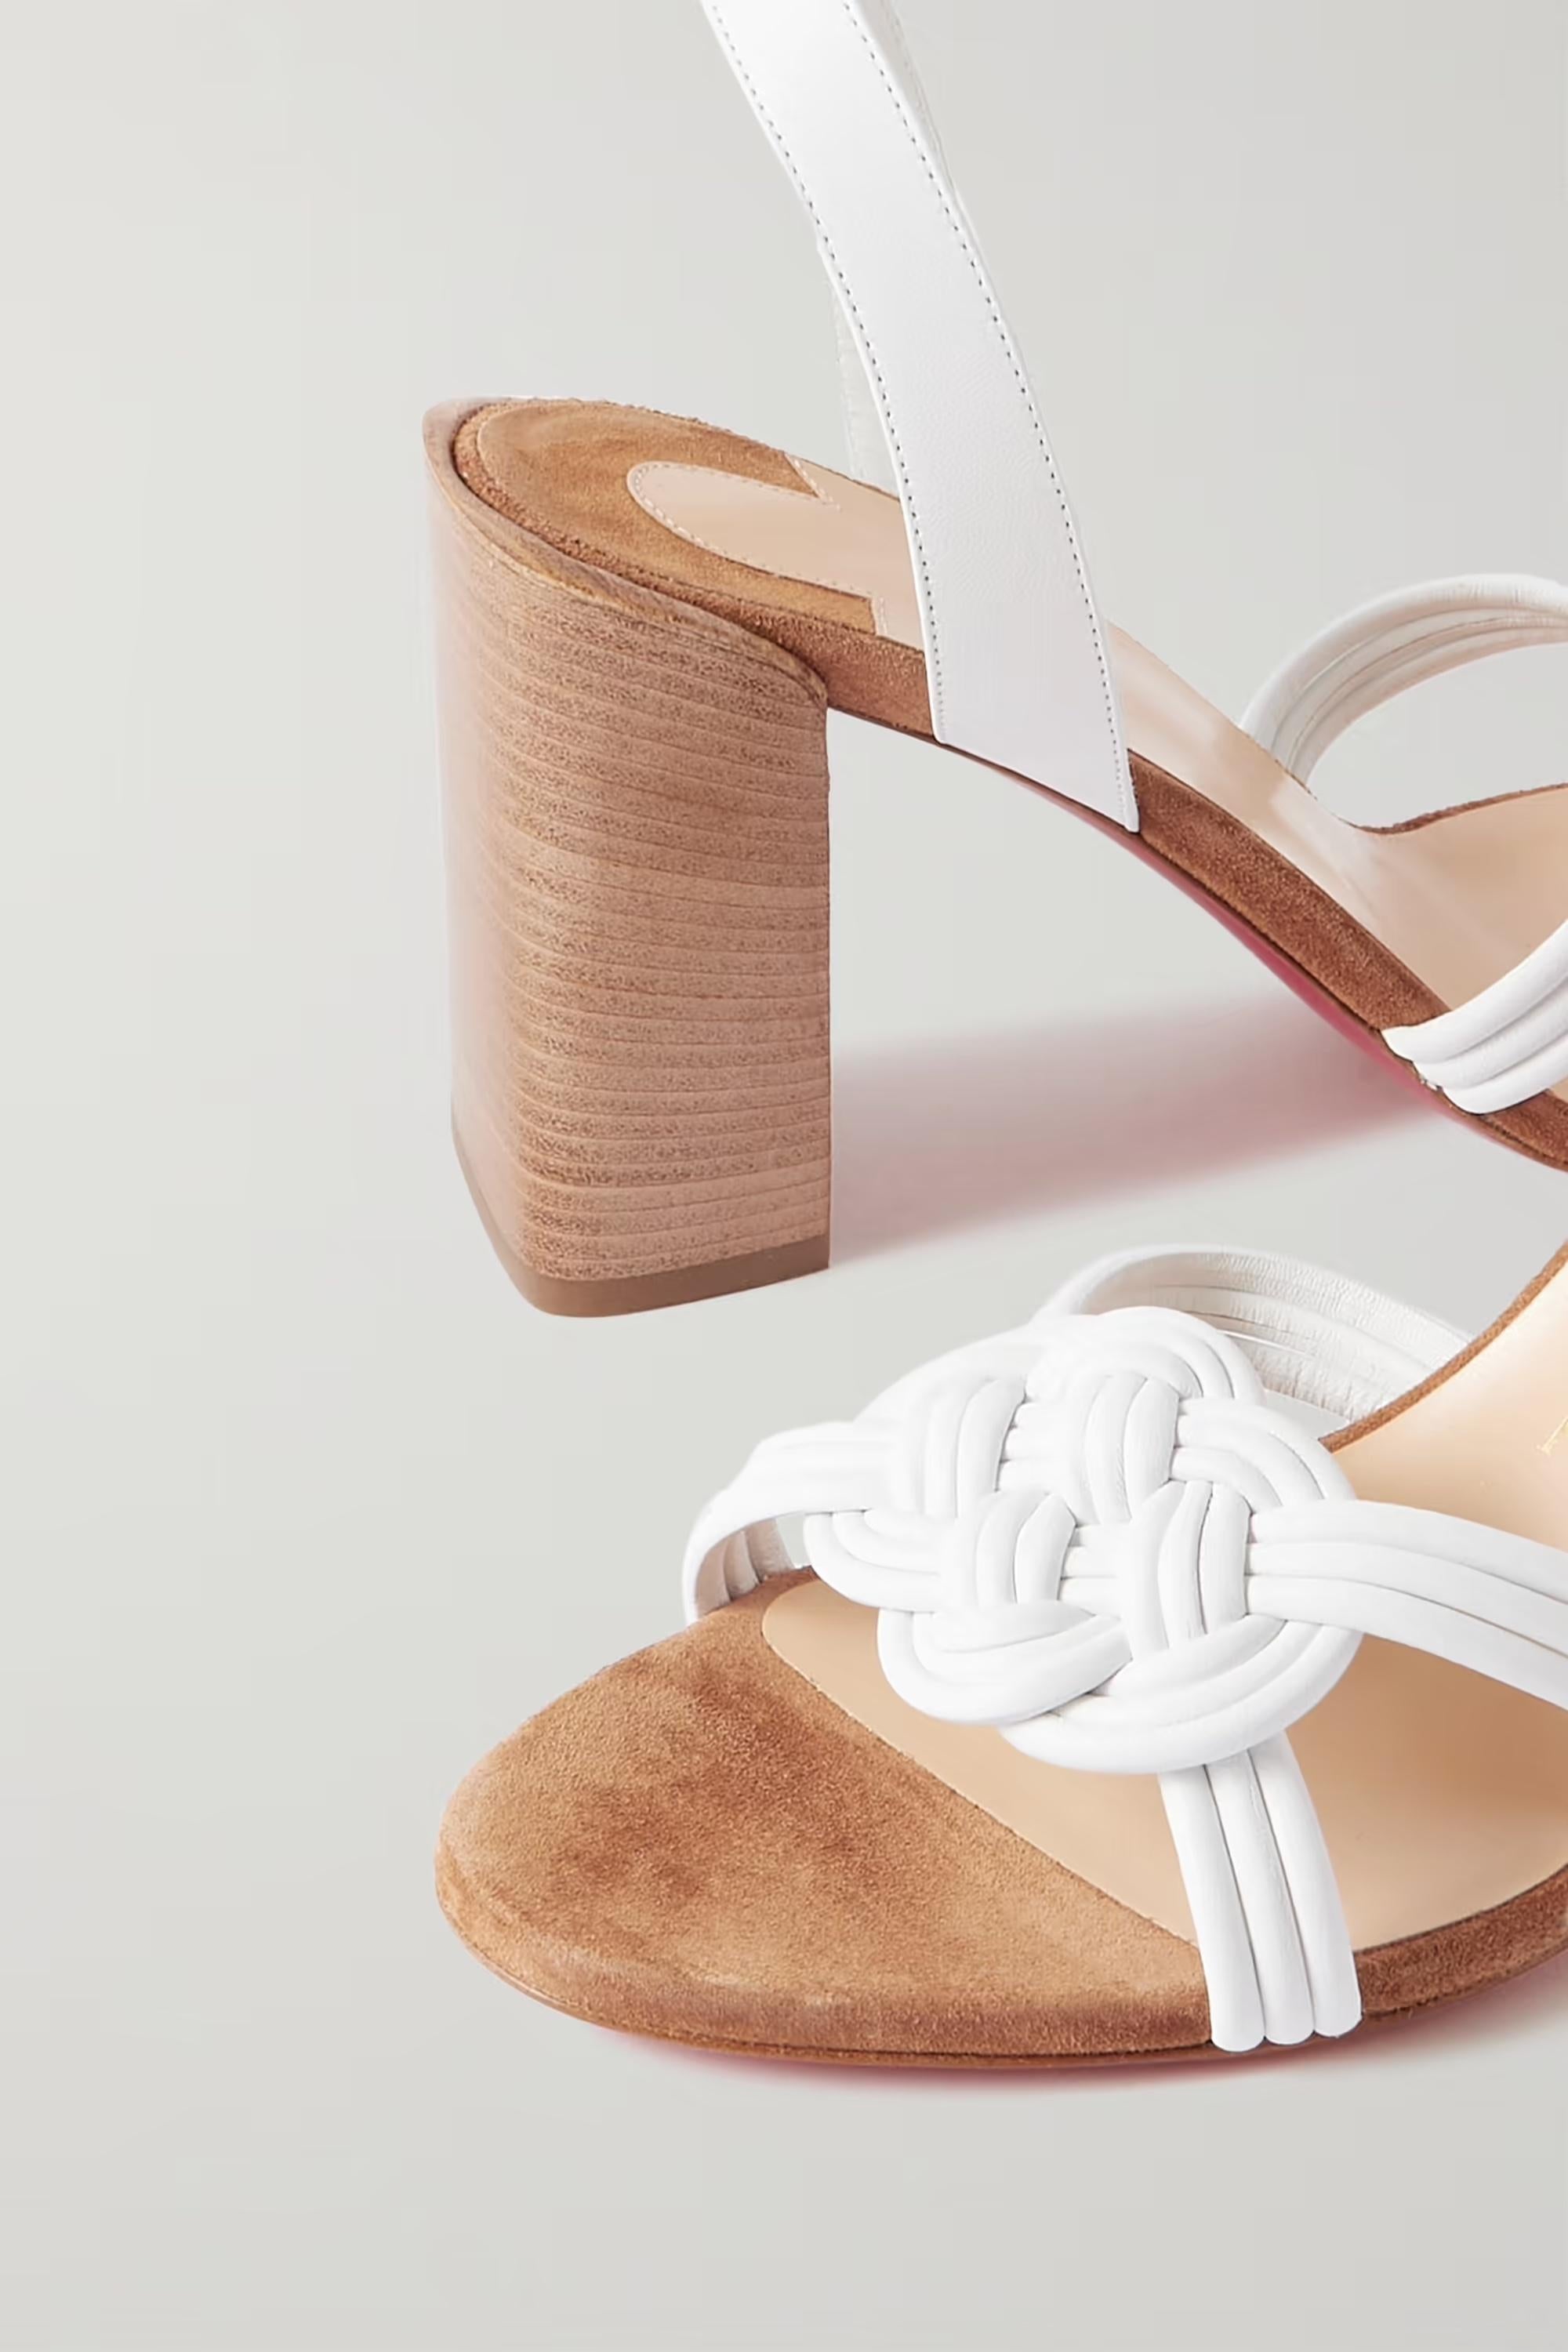 Christian Louboutin's 'Ella' sandals have been made in Italy from supple white leather that's artfully interwoven at the toes. They're set on sturdy block heels and have supportive buckle-fastening ankle straps. Brand new, never worn. Comes in all